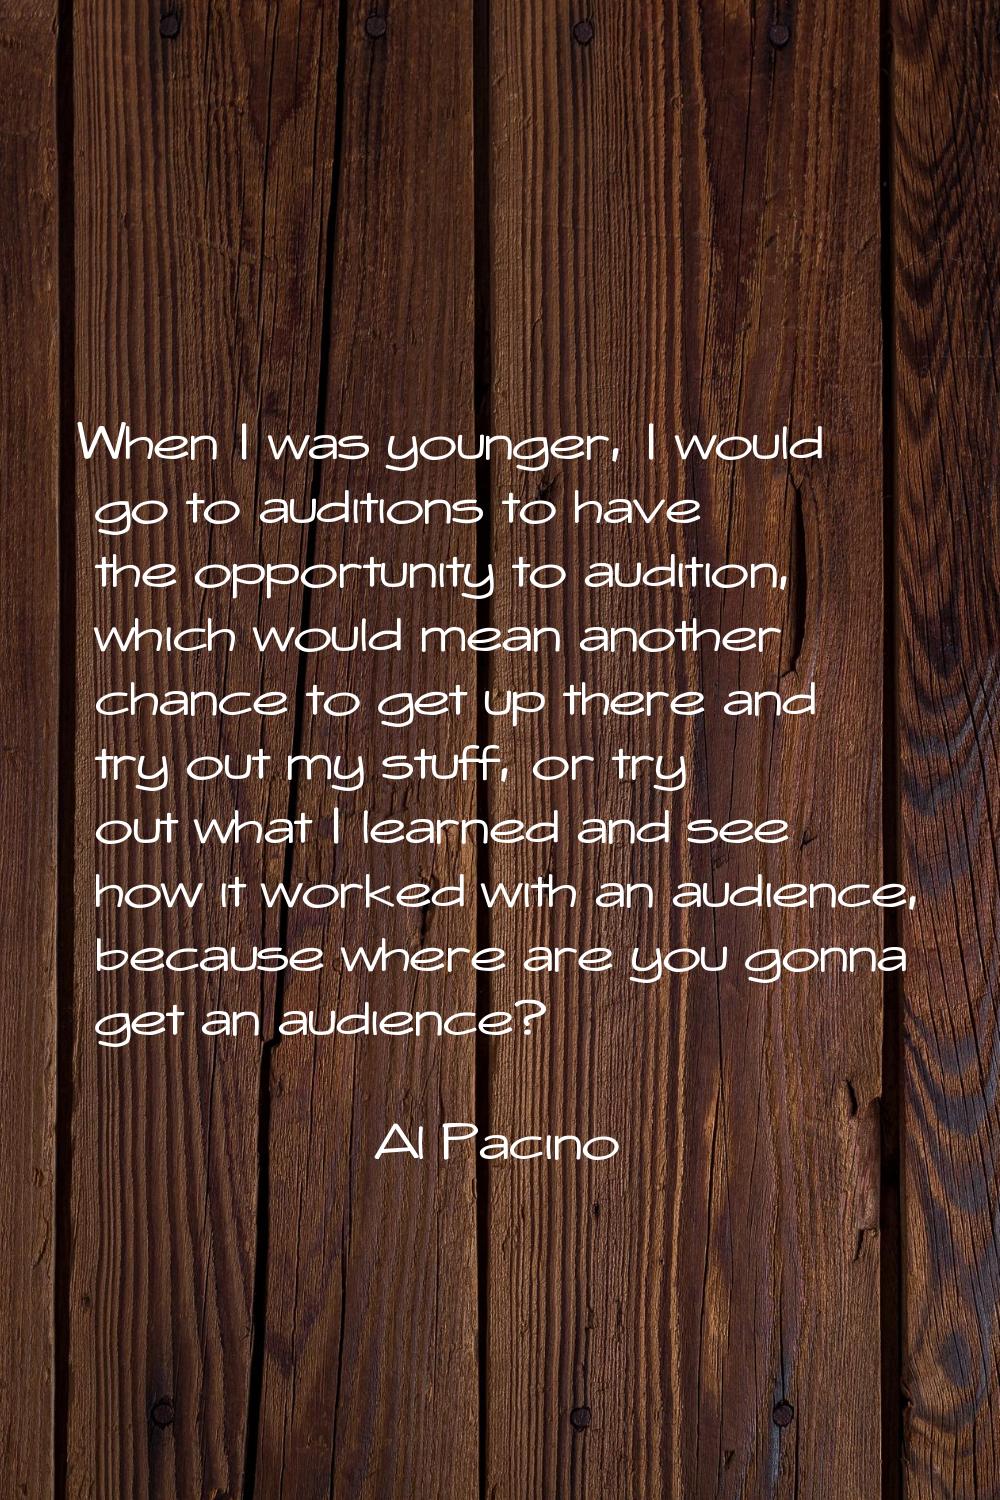 When I was younger, I would go to auditions to have the opportunity to audition, which would mean a